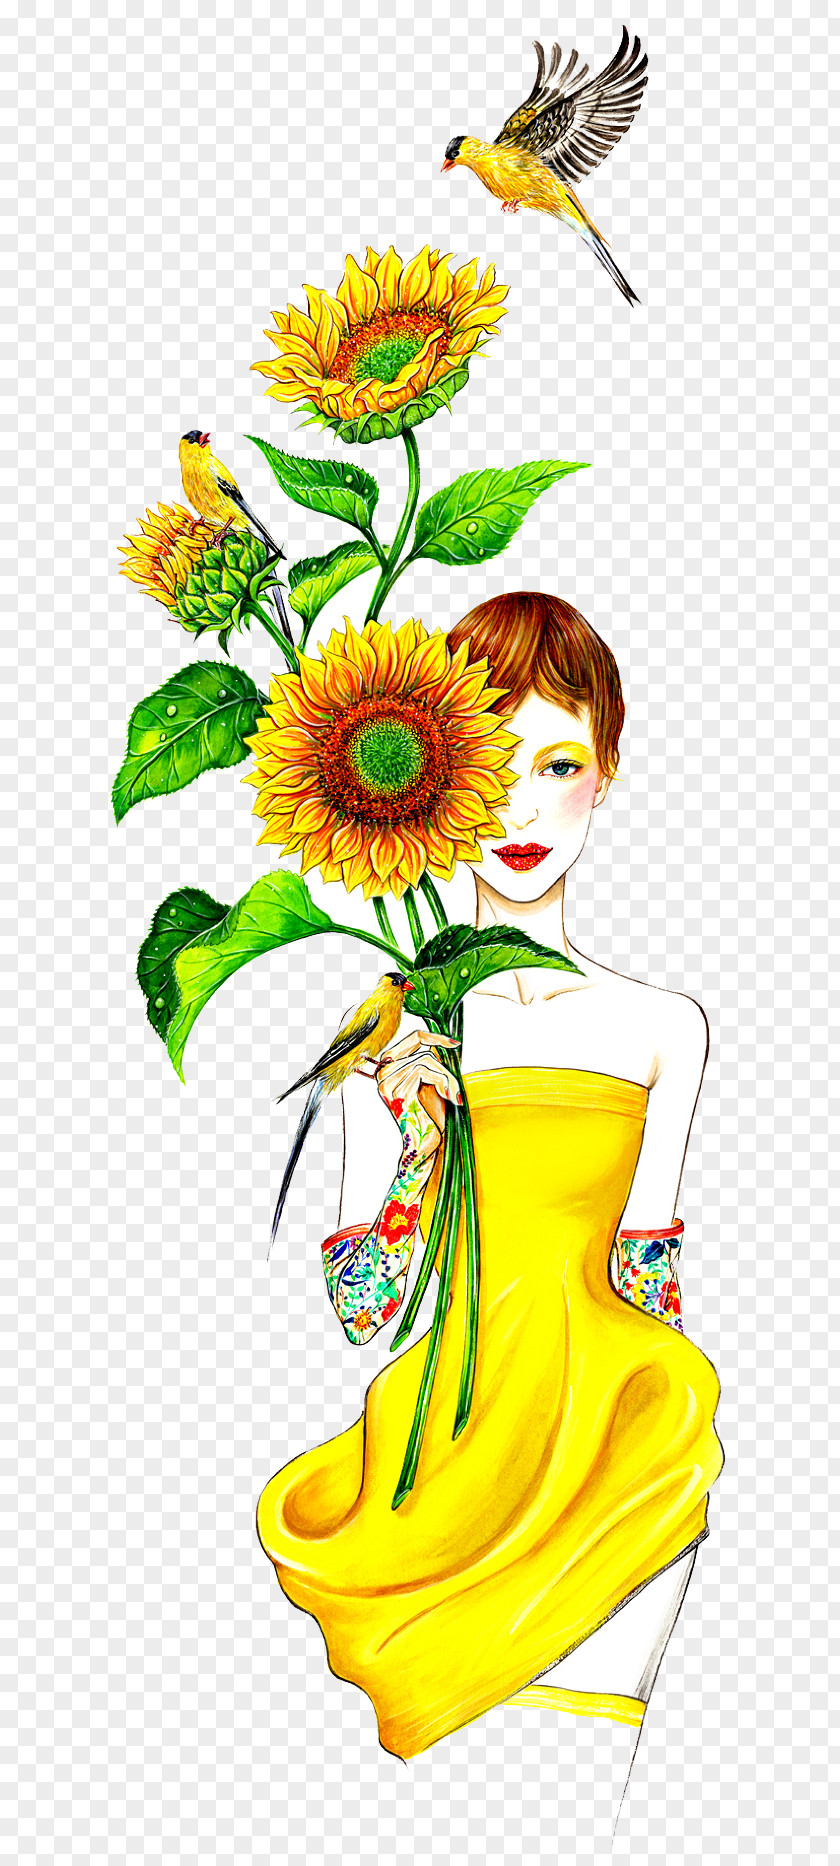 Sunflowers And Birds Fashion Illustration Drawing Illustrator PNG